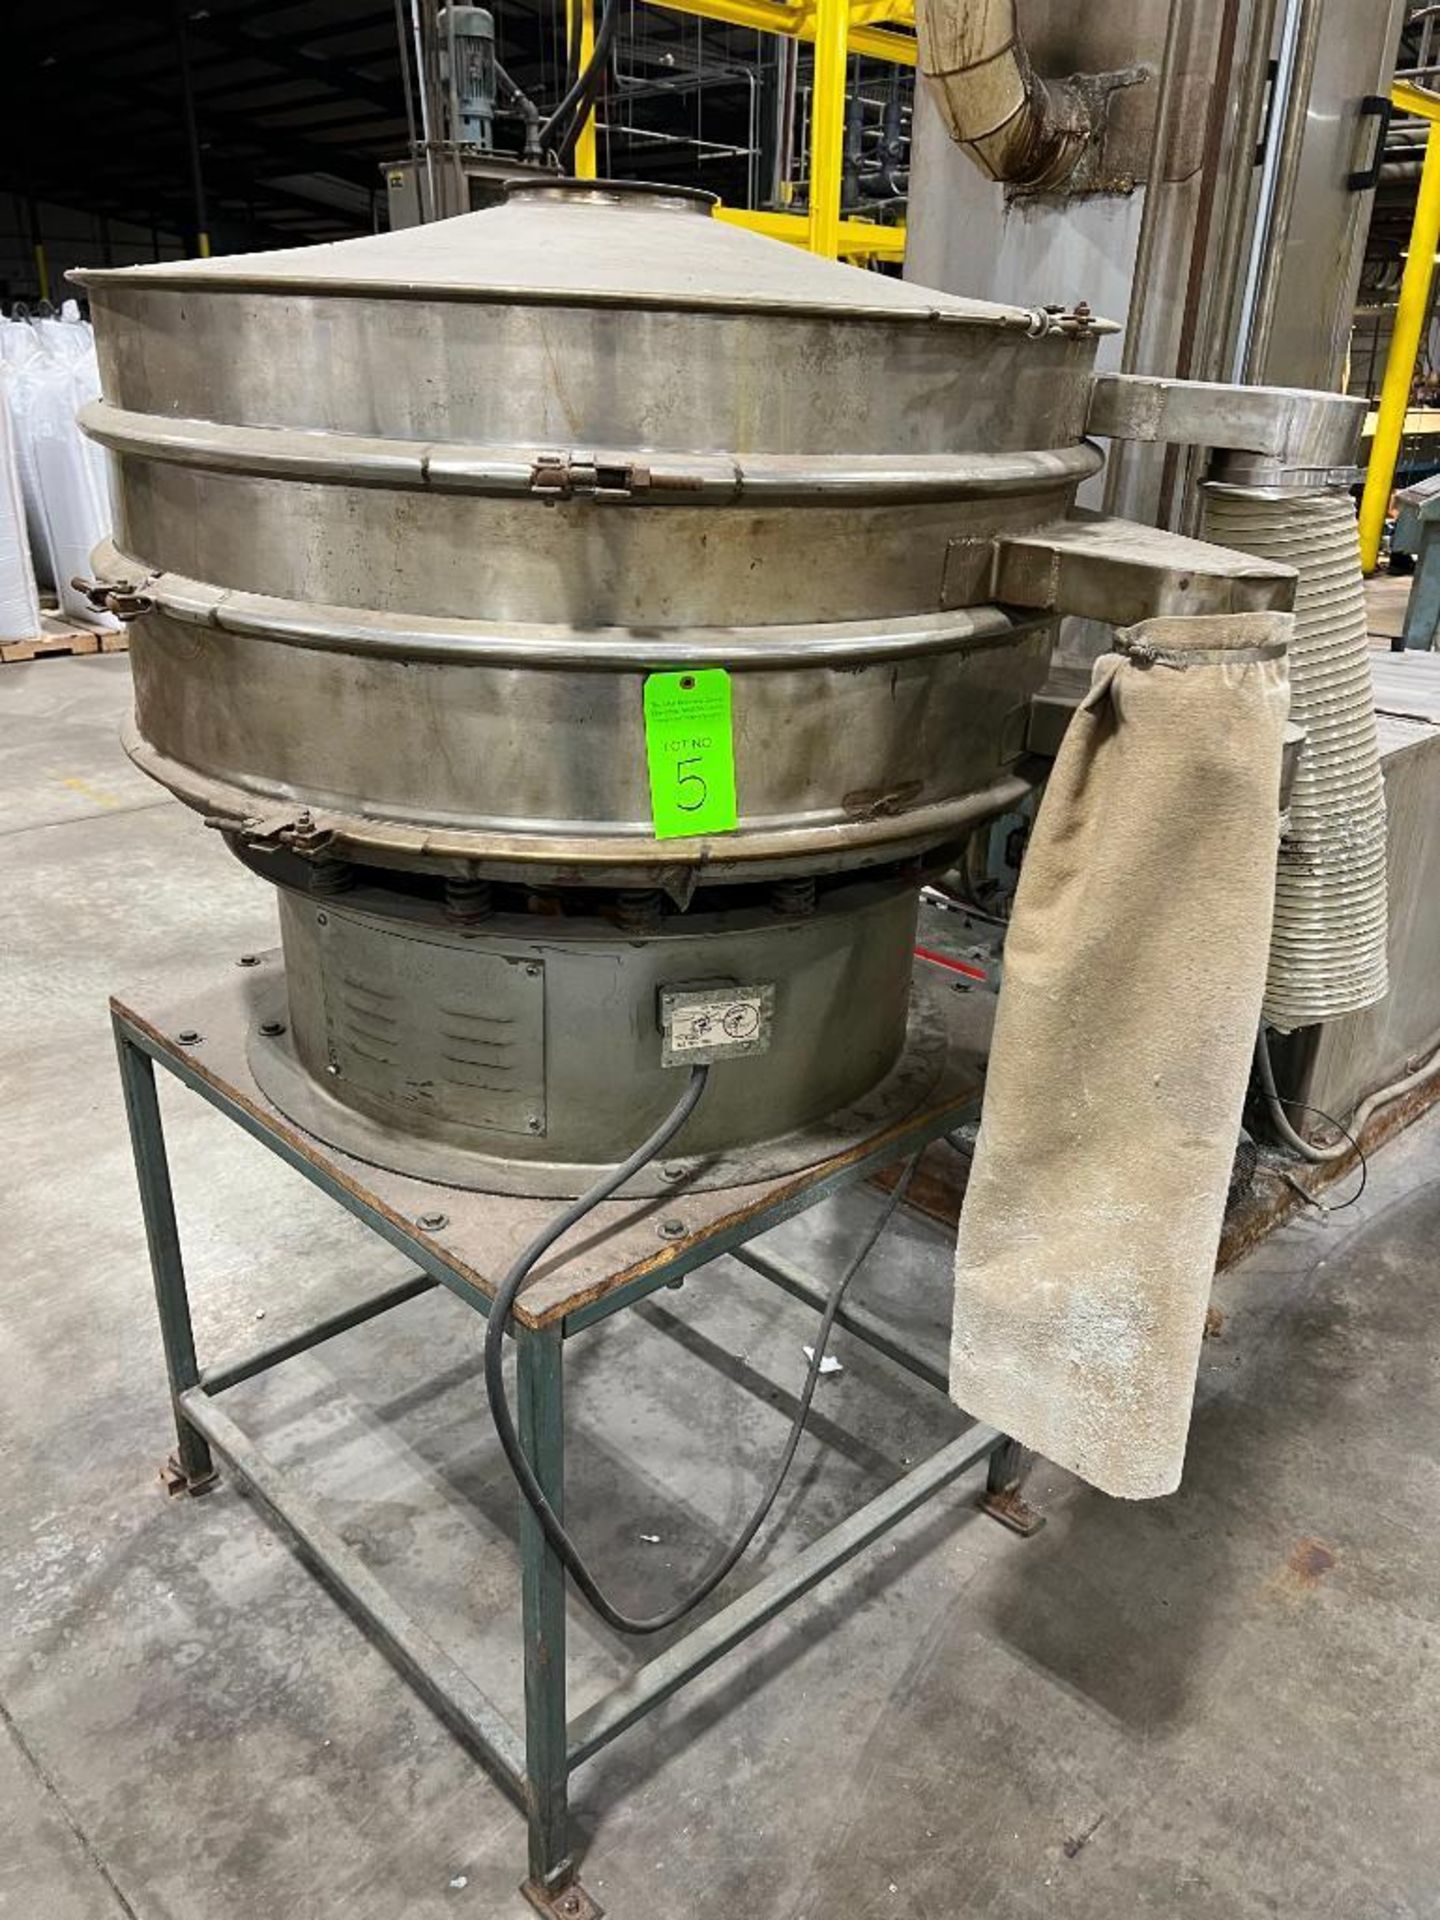 Crown Spin Dryer